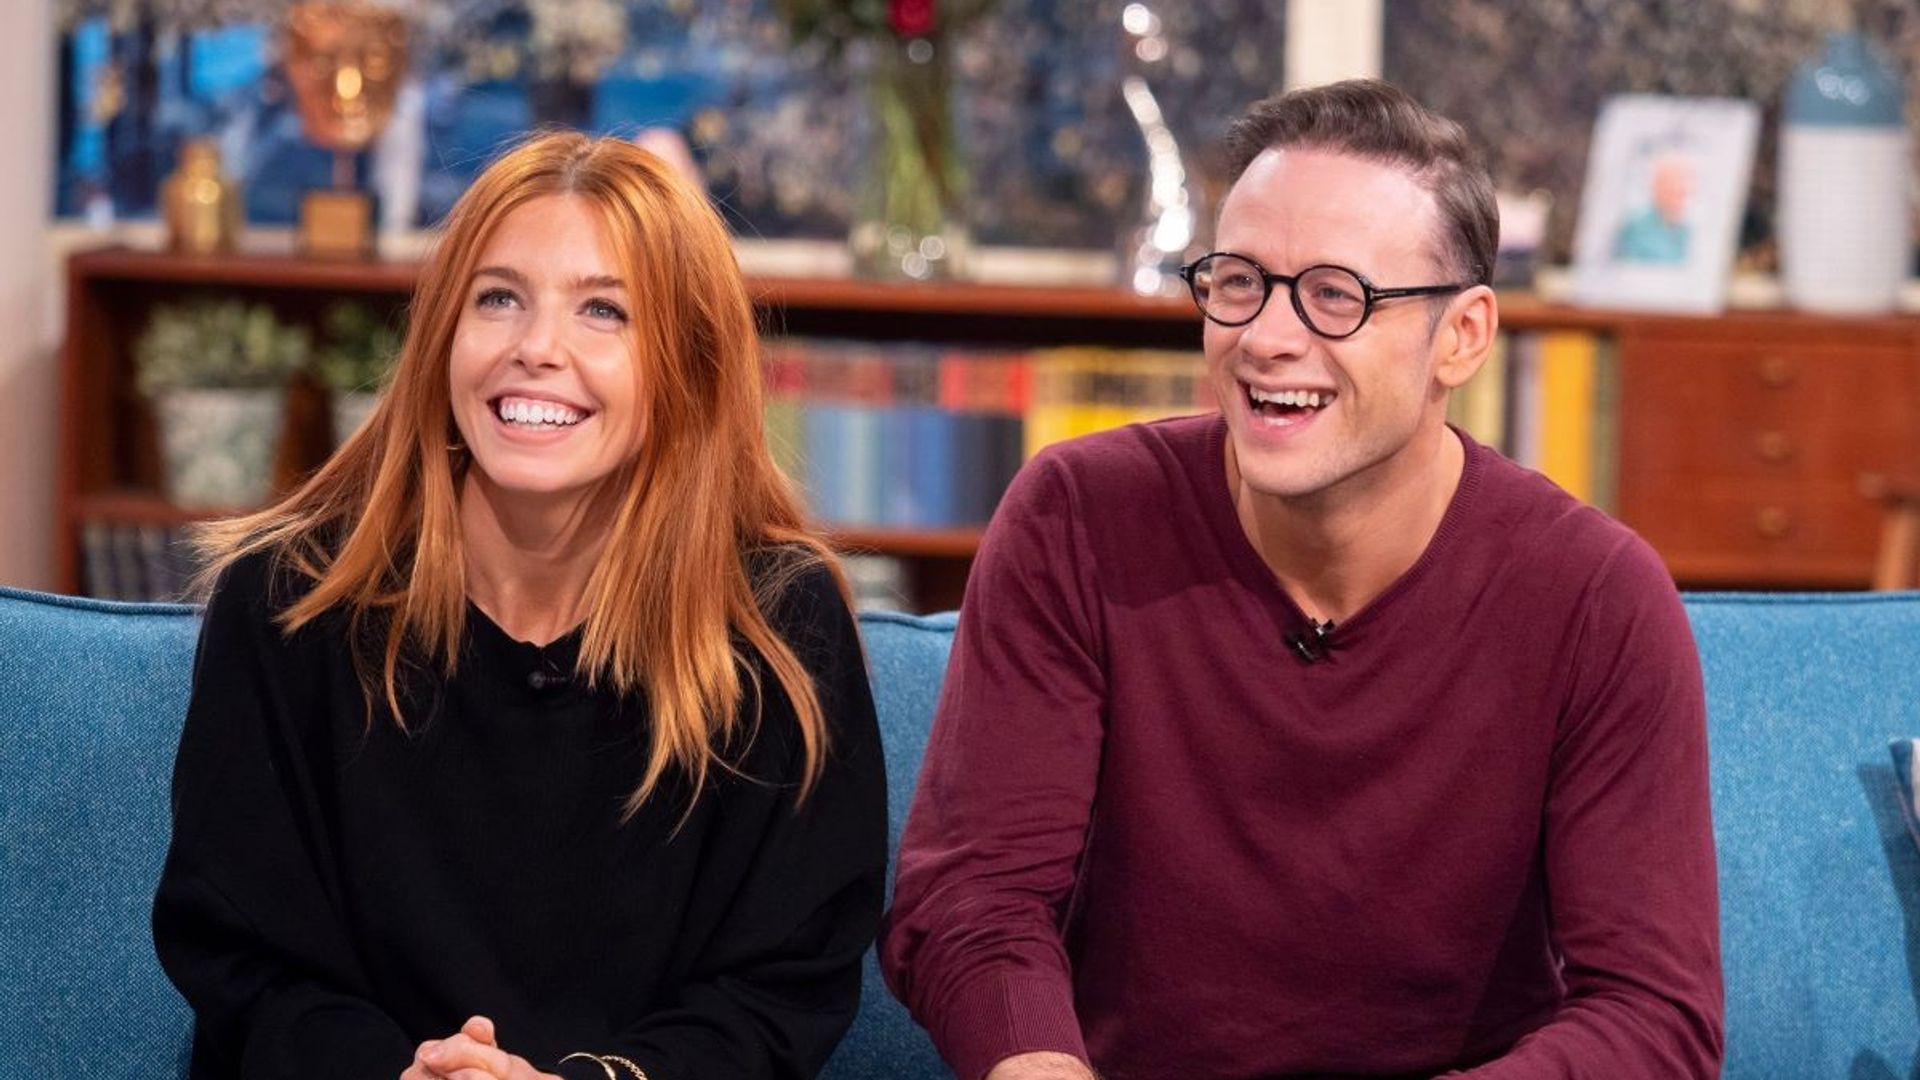 Stacey Dooley shares excitement over Kevin Clifton news